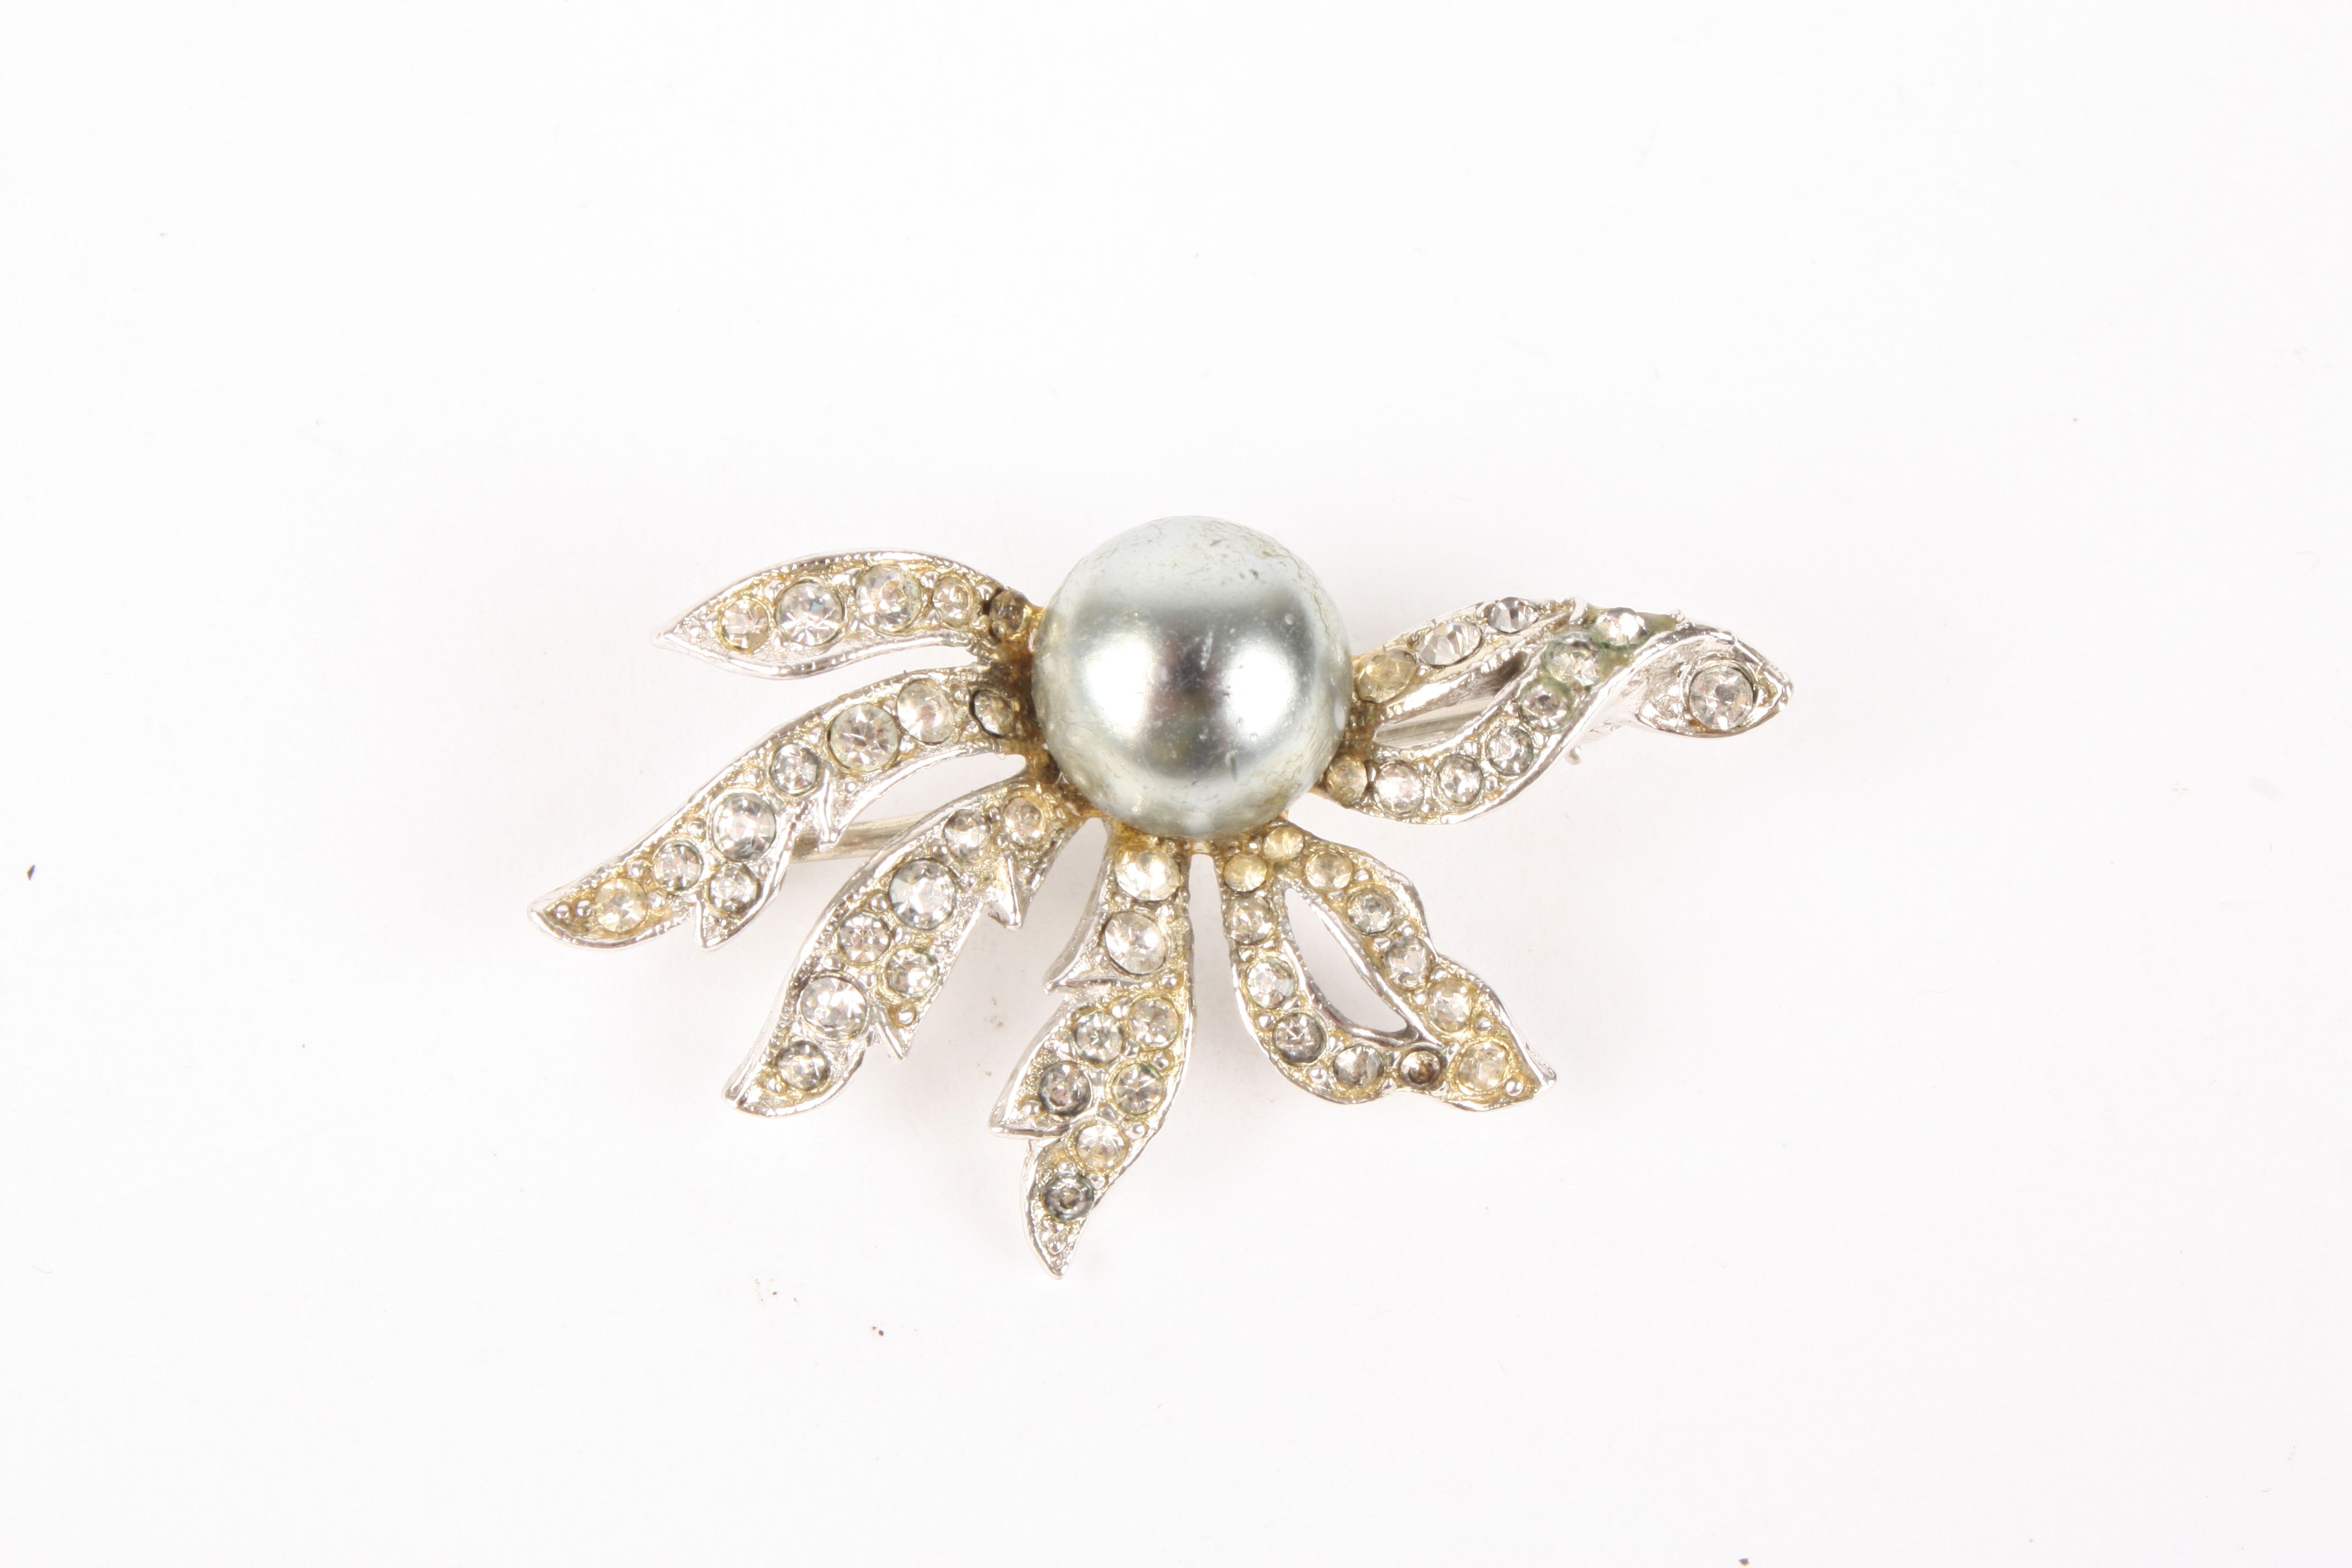 A Christian Dior floral brooch by Mitchel Maer
set with simulated black pearl, surrounded by